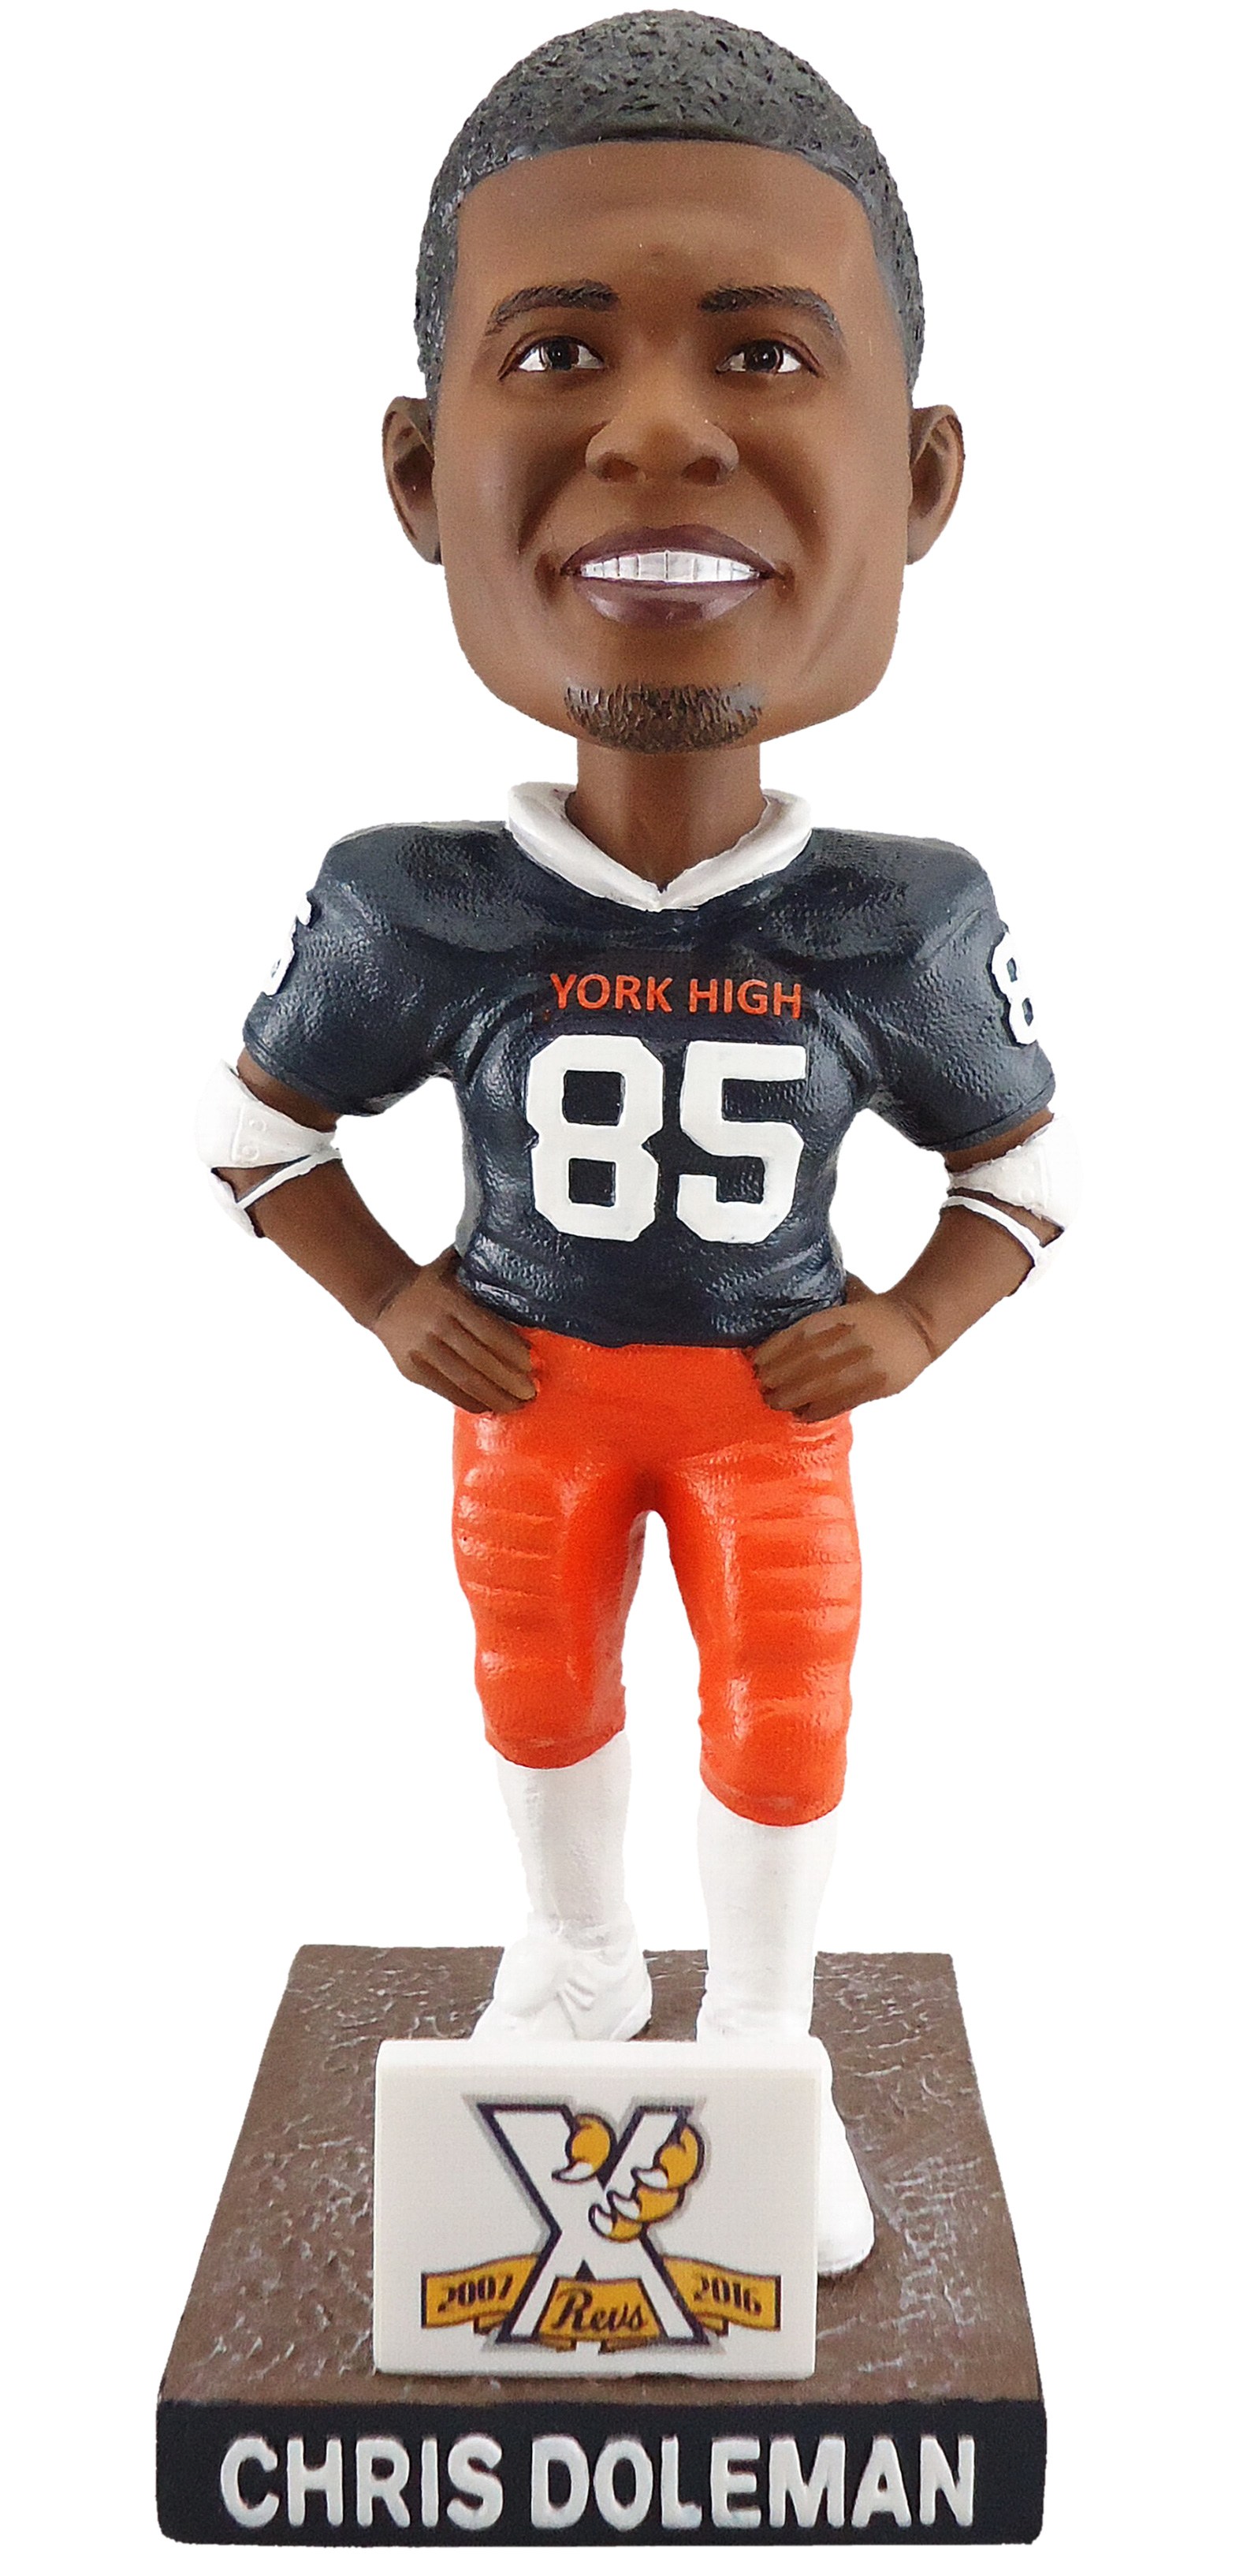 York Revolution's Chris Doleman Bobblehead - June 1, 2016 Photo on OurSports Central1596 x 3268